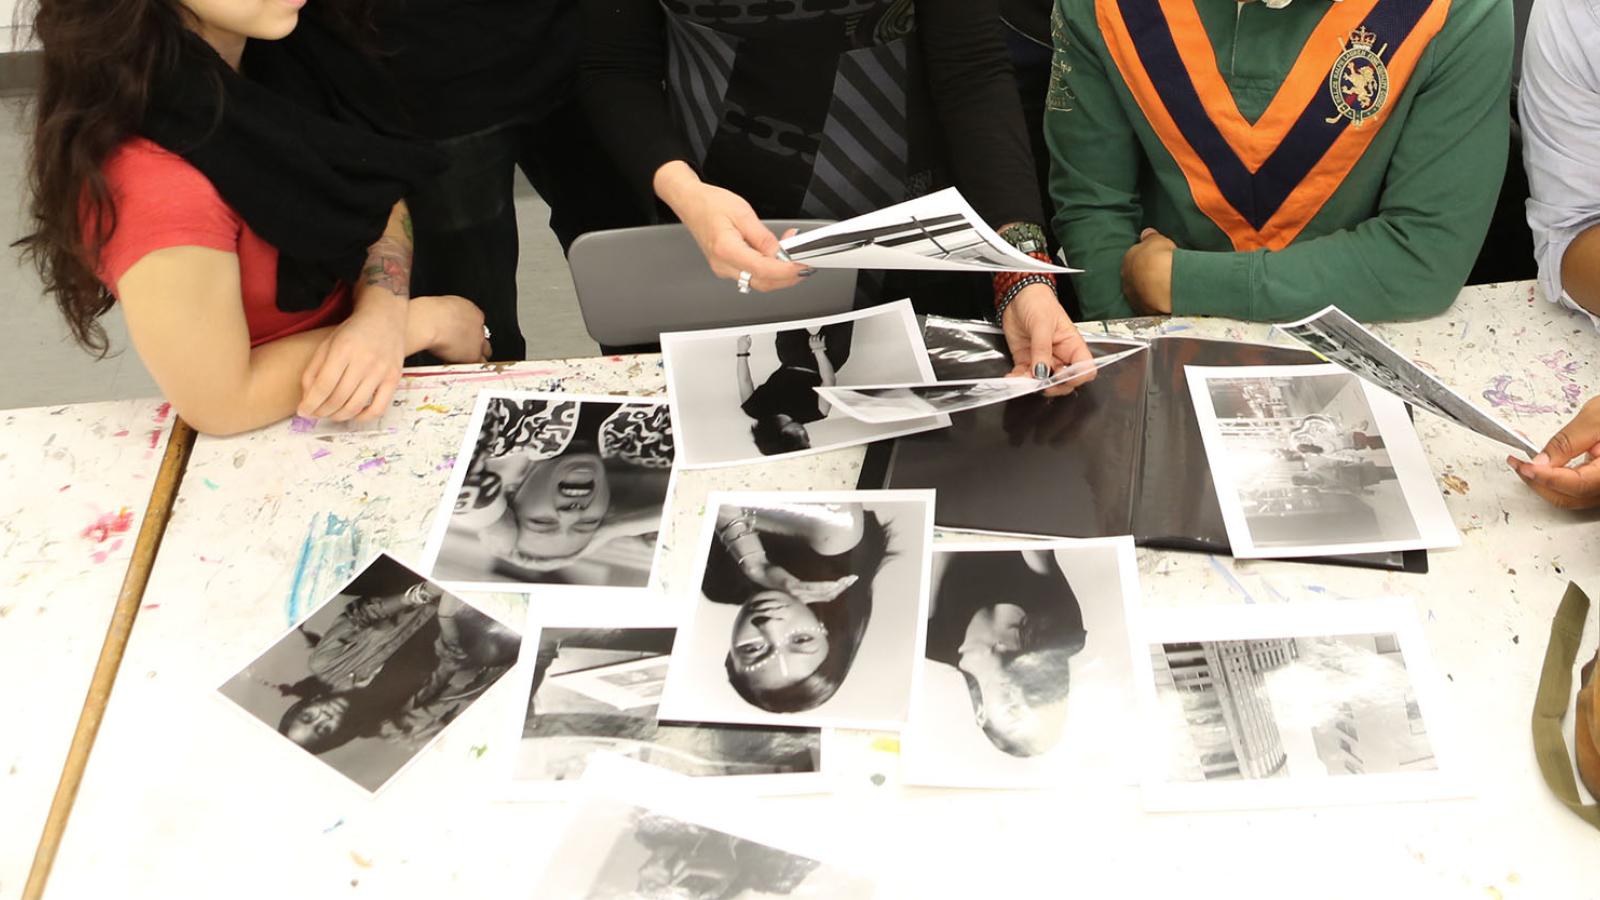 Students and professor looking over printed/developed black and white photos on a white desk